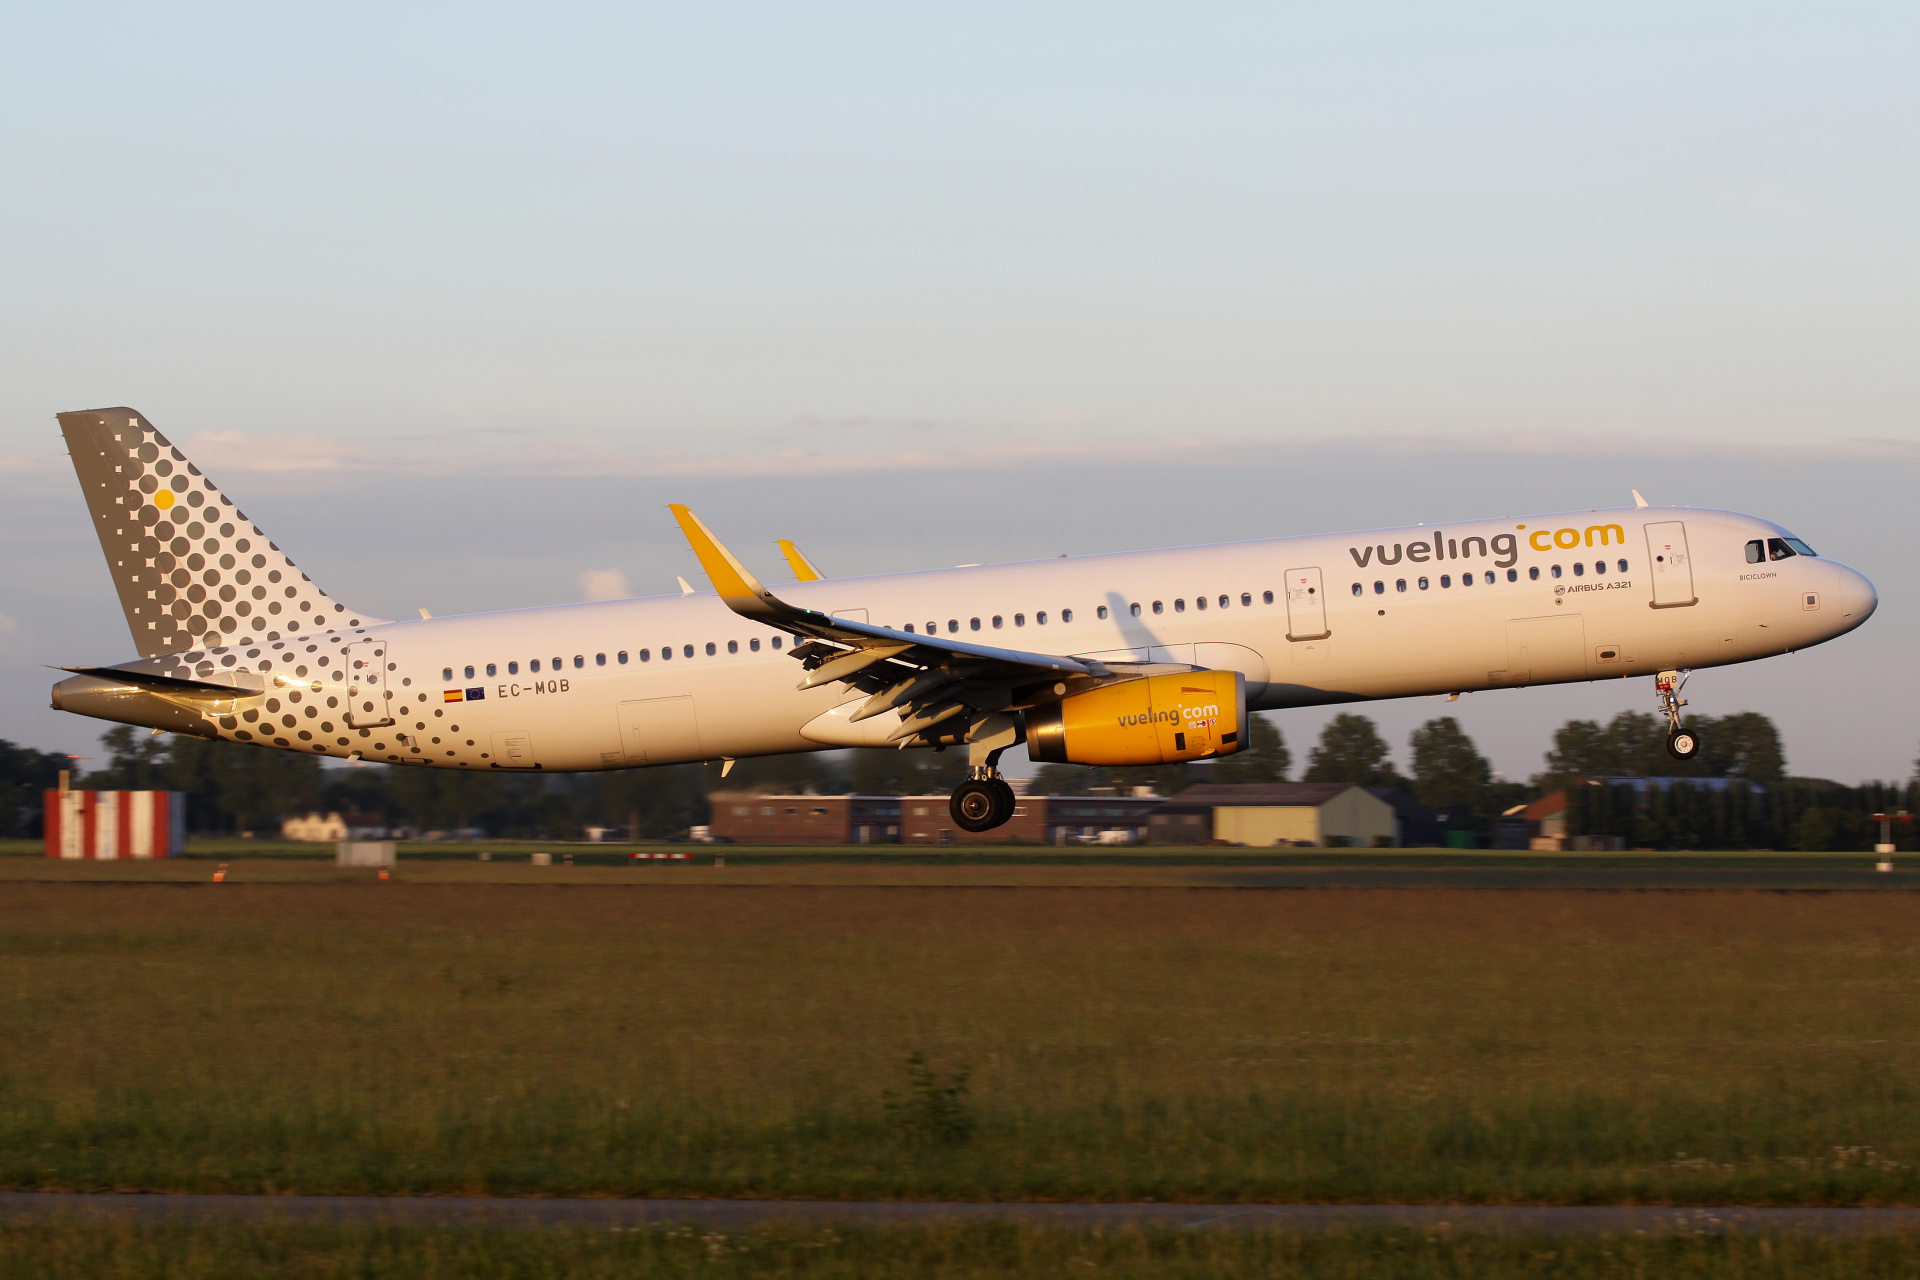 EC-MQB, Vueling Airlines (Aircraft » Schiphol Spotting » Airbus A321-200)